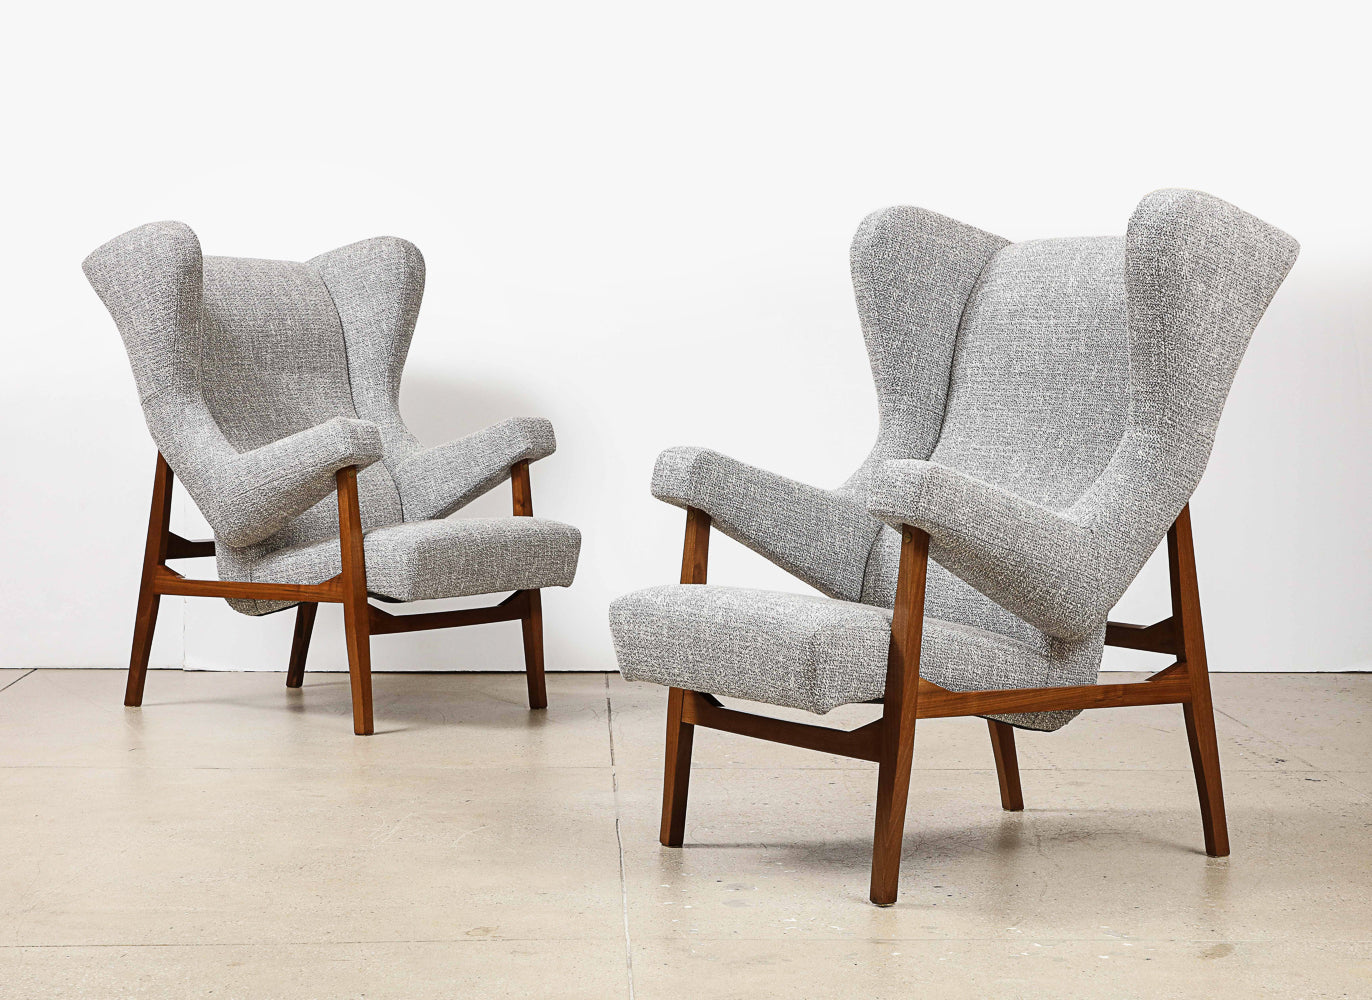 Pair of Fiorenza Lounge Chairs by Franco Albini for Arflex